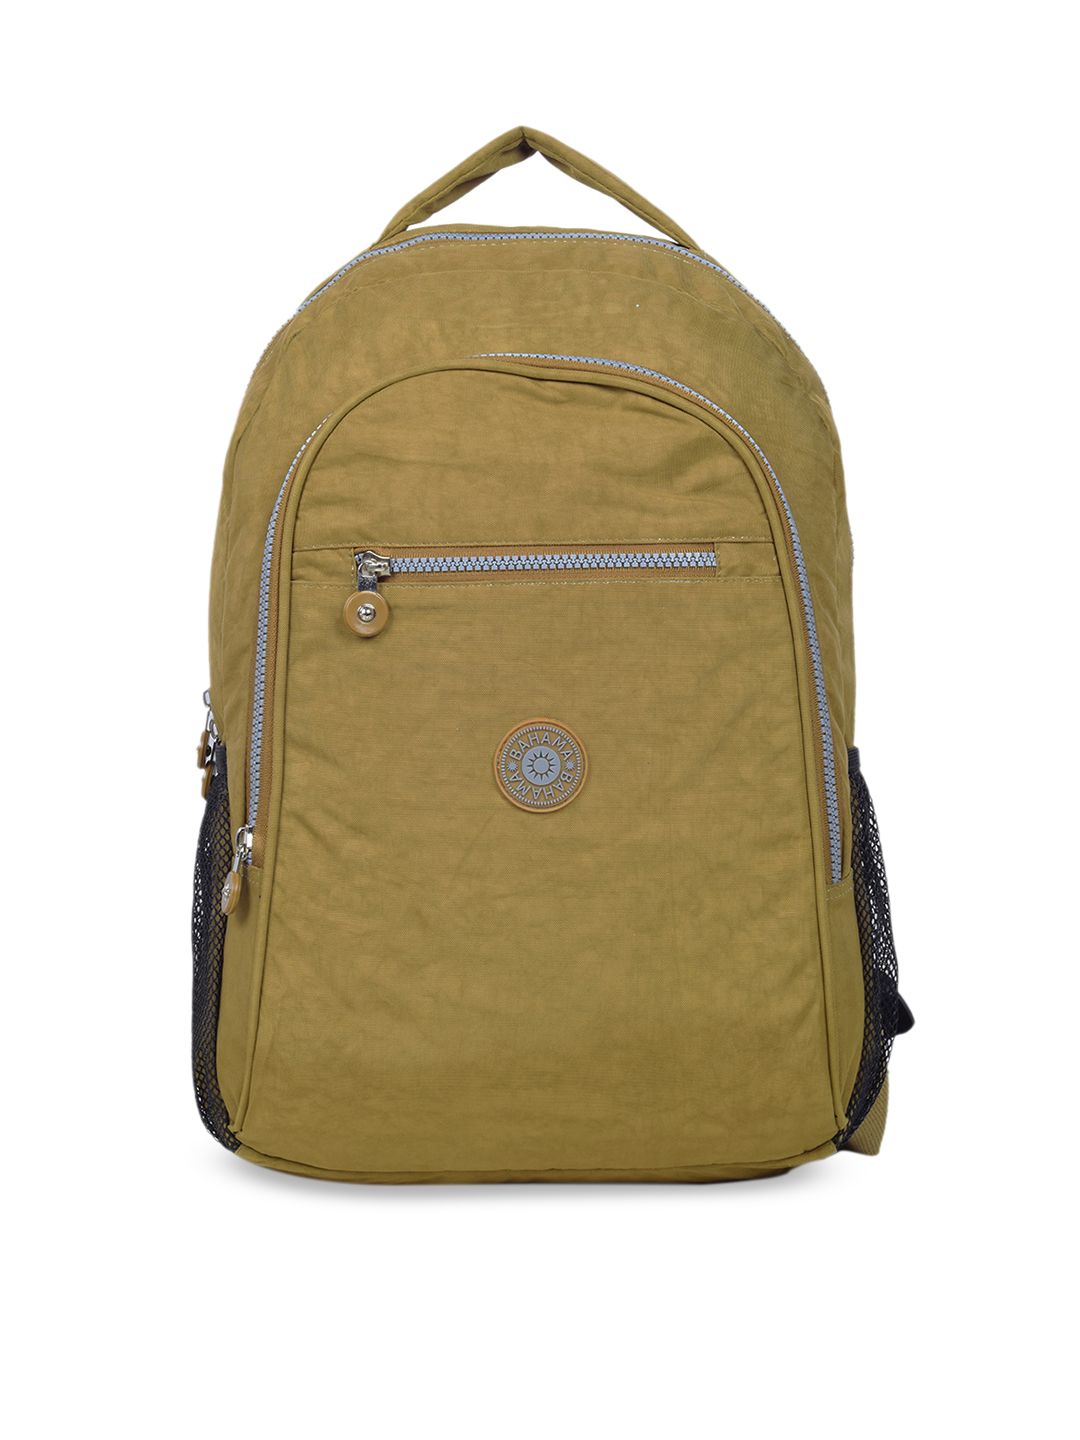 BAHAMA Crinkle Unisex Mustard Yellow Solid Backpack Price in India